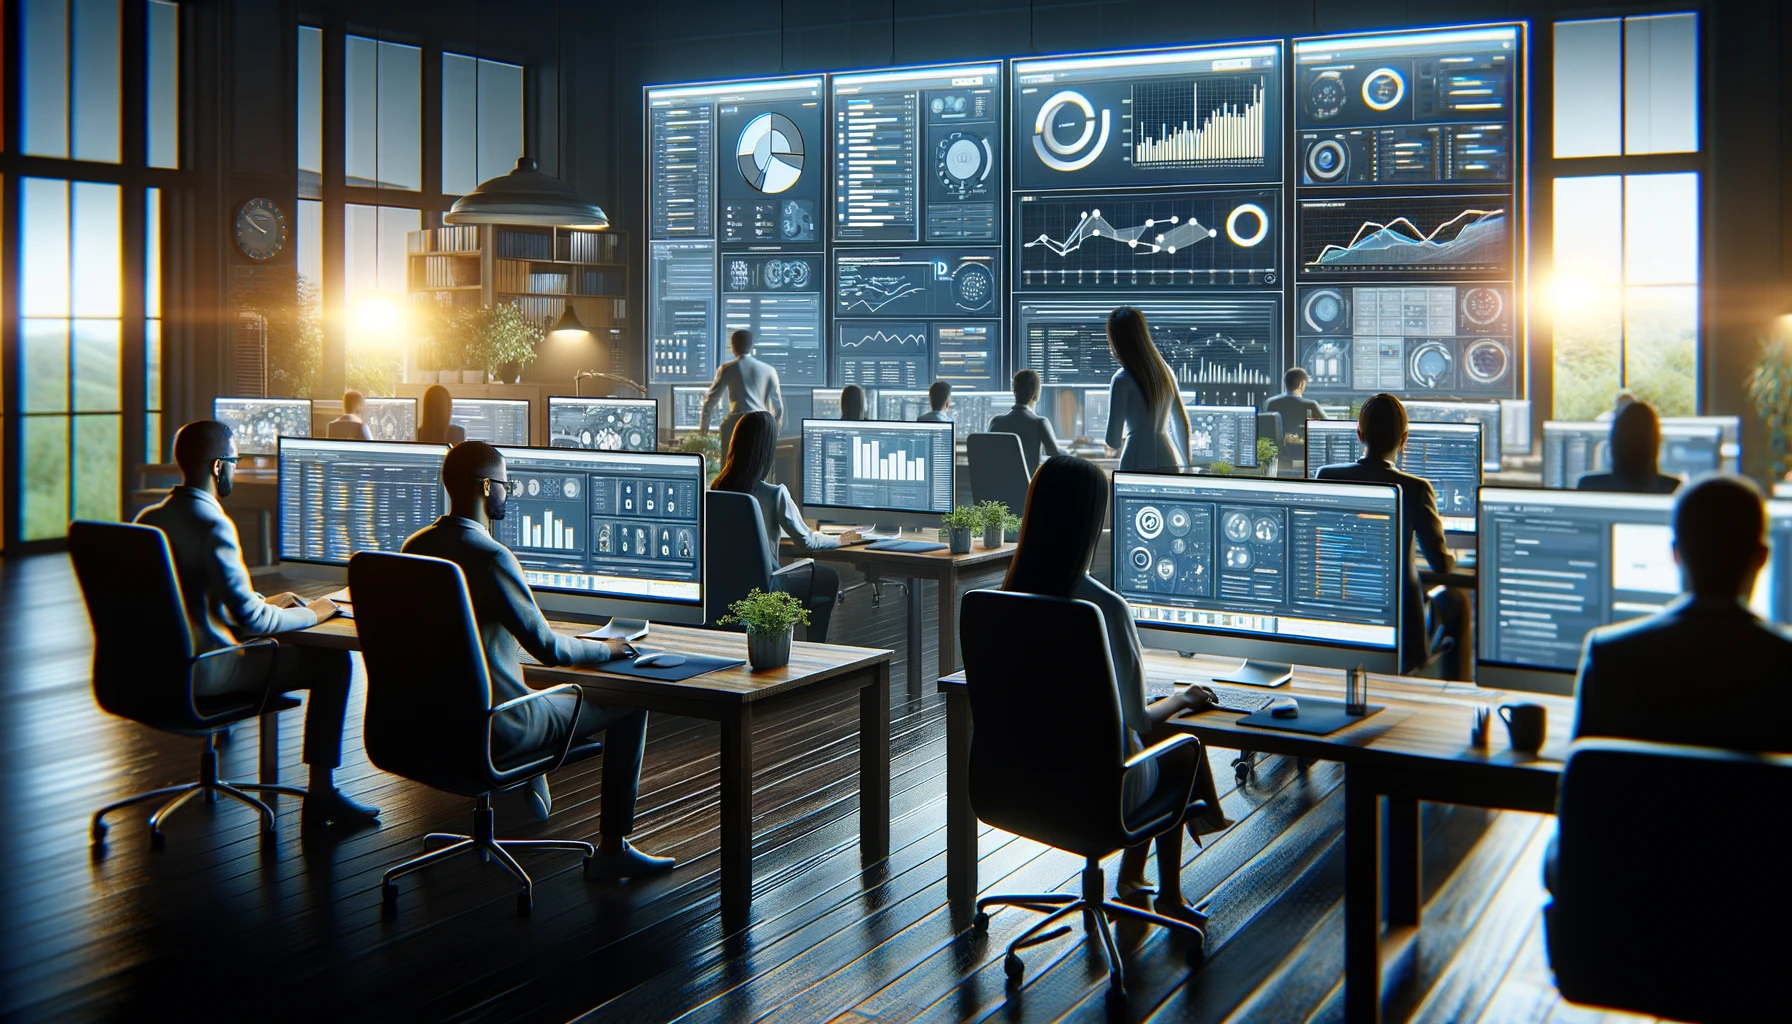 eam of digital marketers and web developers strategizing over high-converting web pages in a high-tech control room filled with data-driven dashboards.